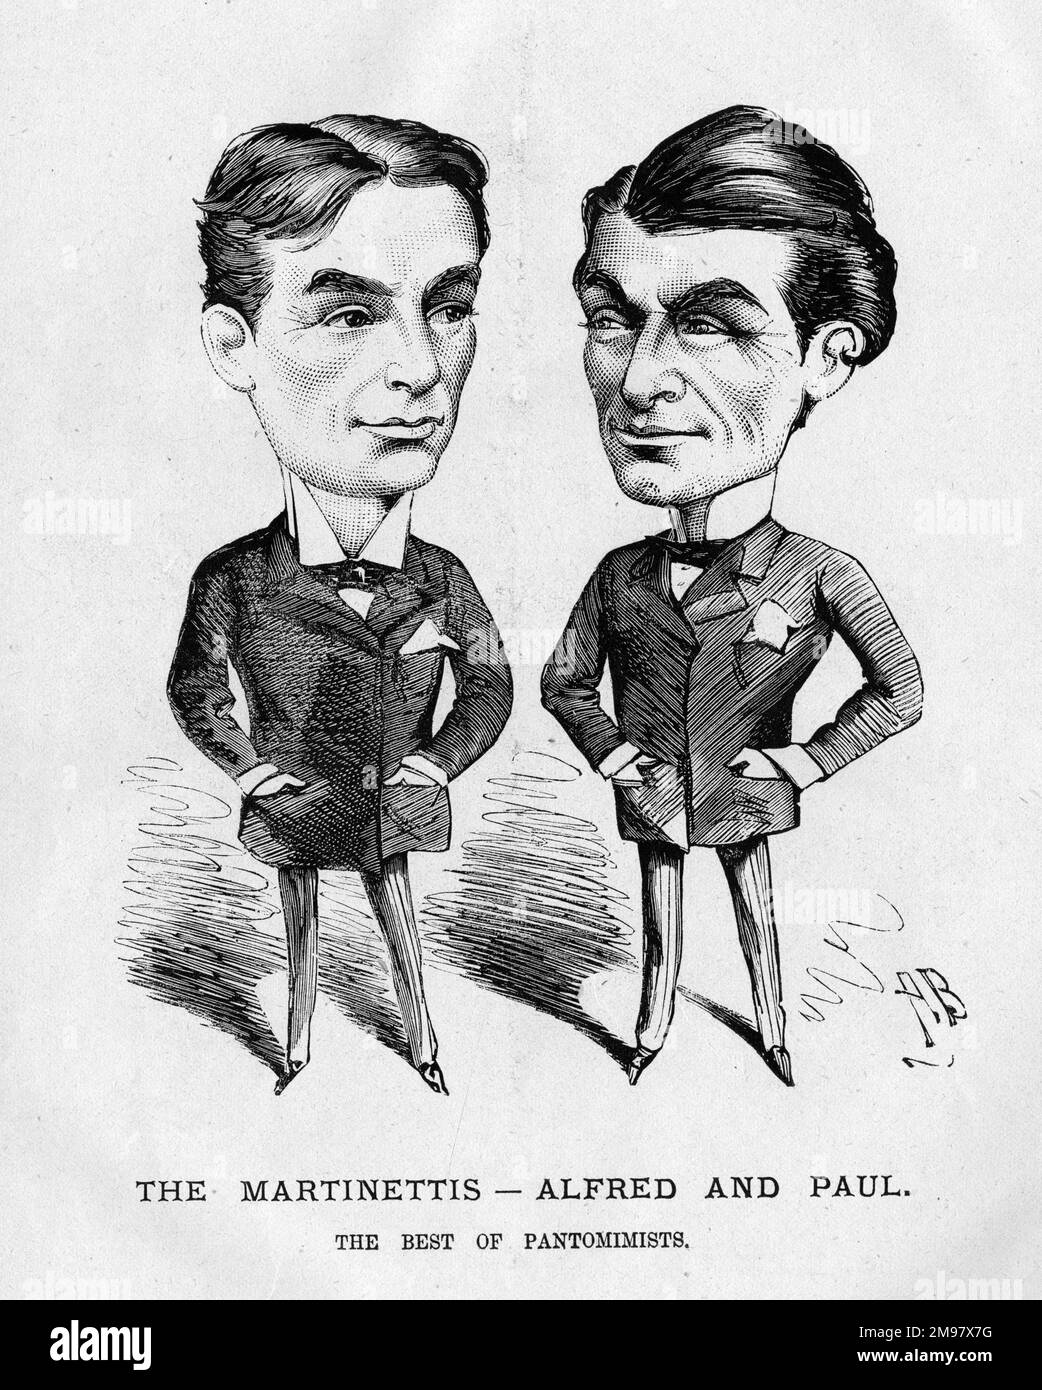 Cartoon of Alfred and Paul Martinetti, American pantomime performers. Stock Photo